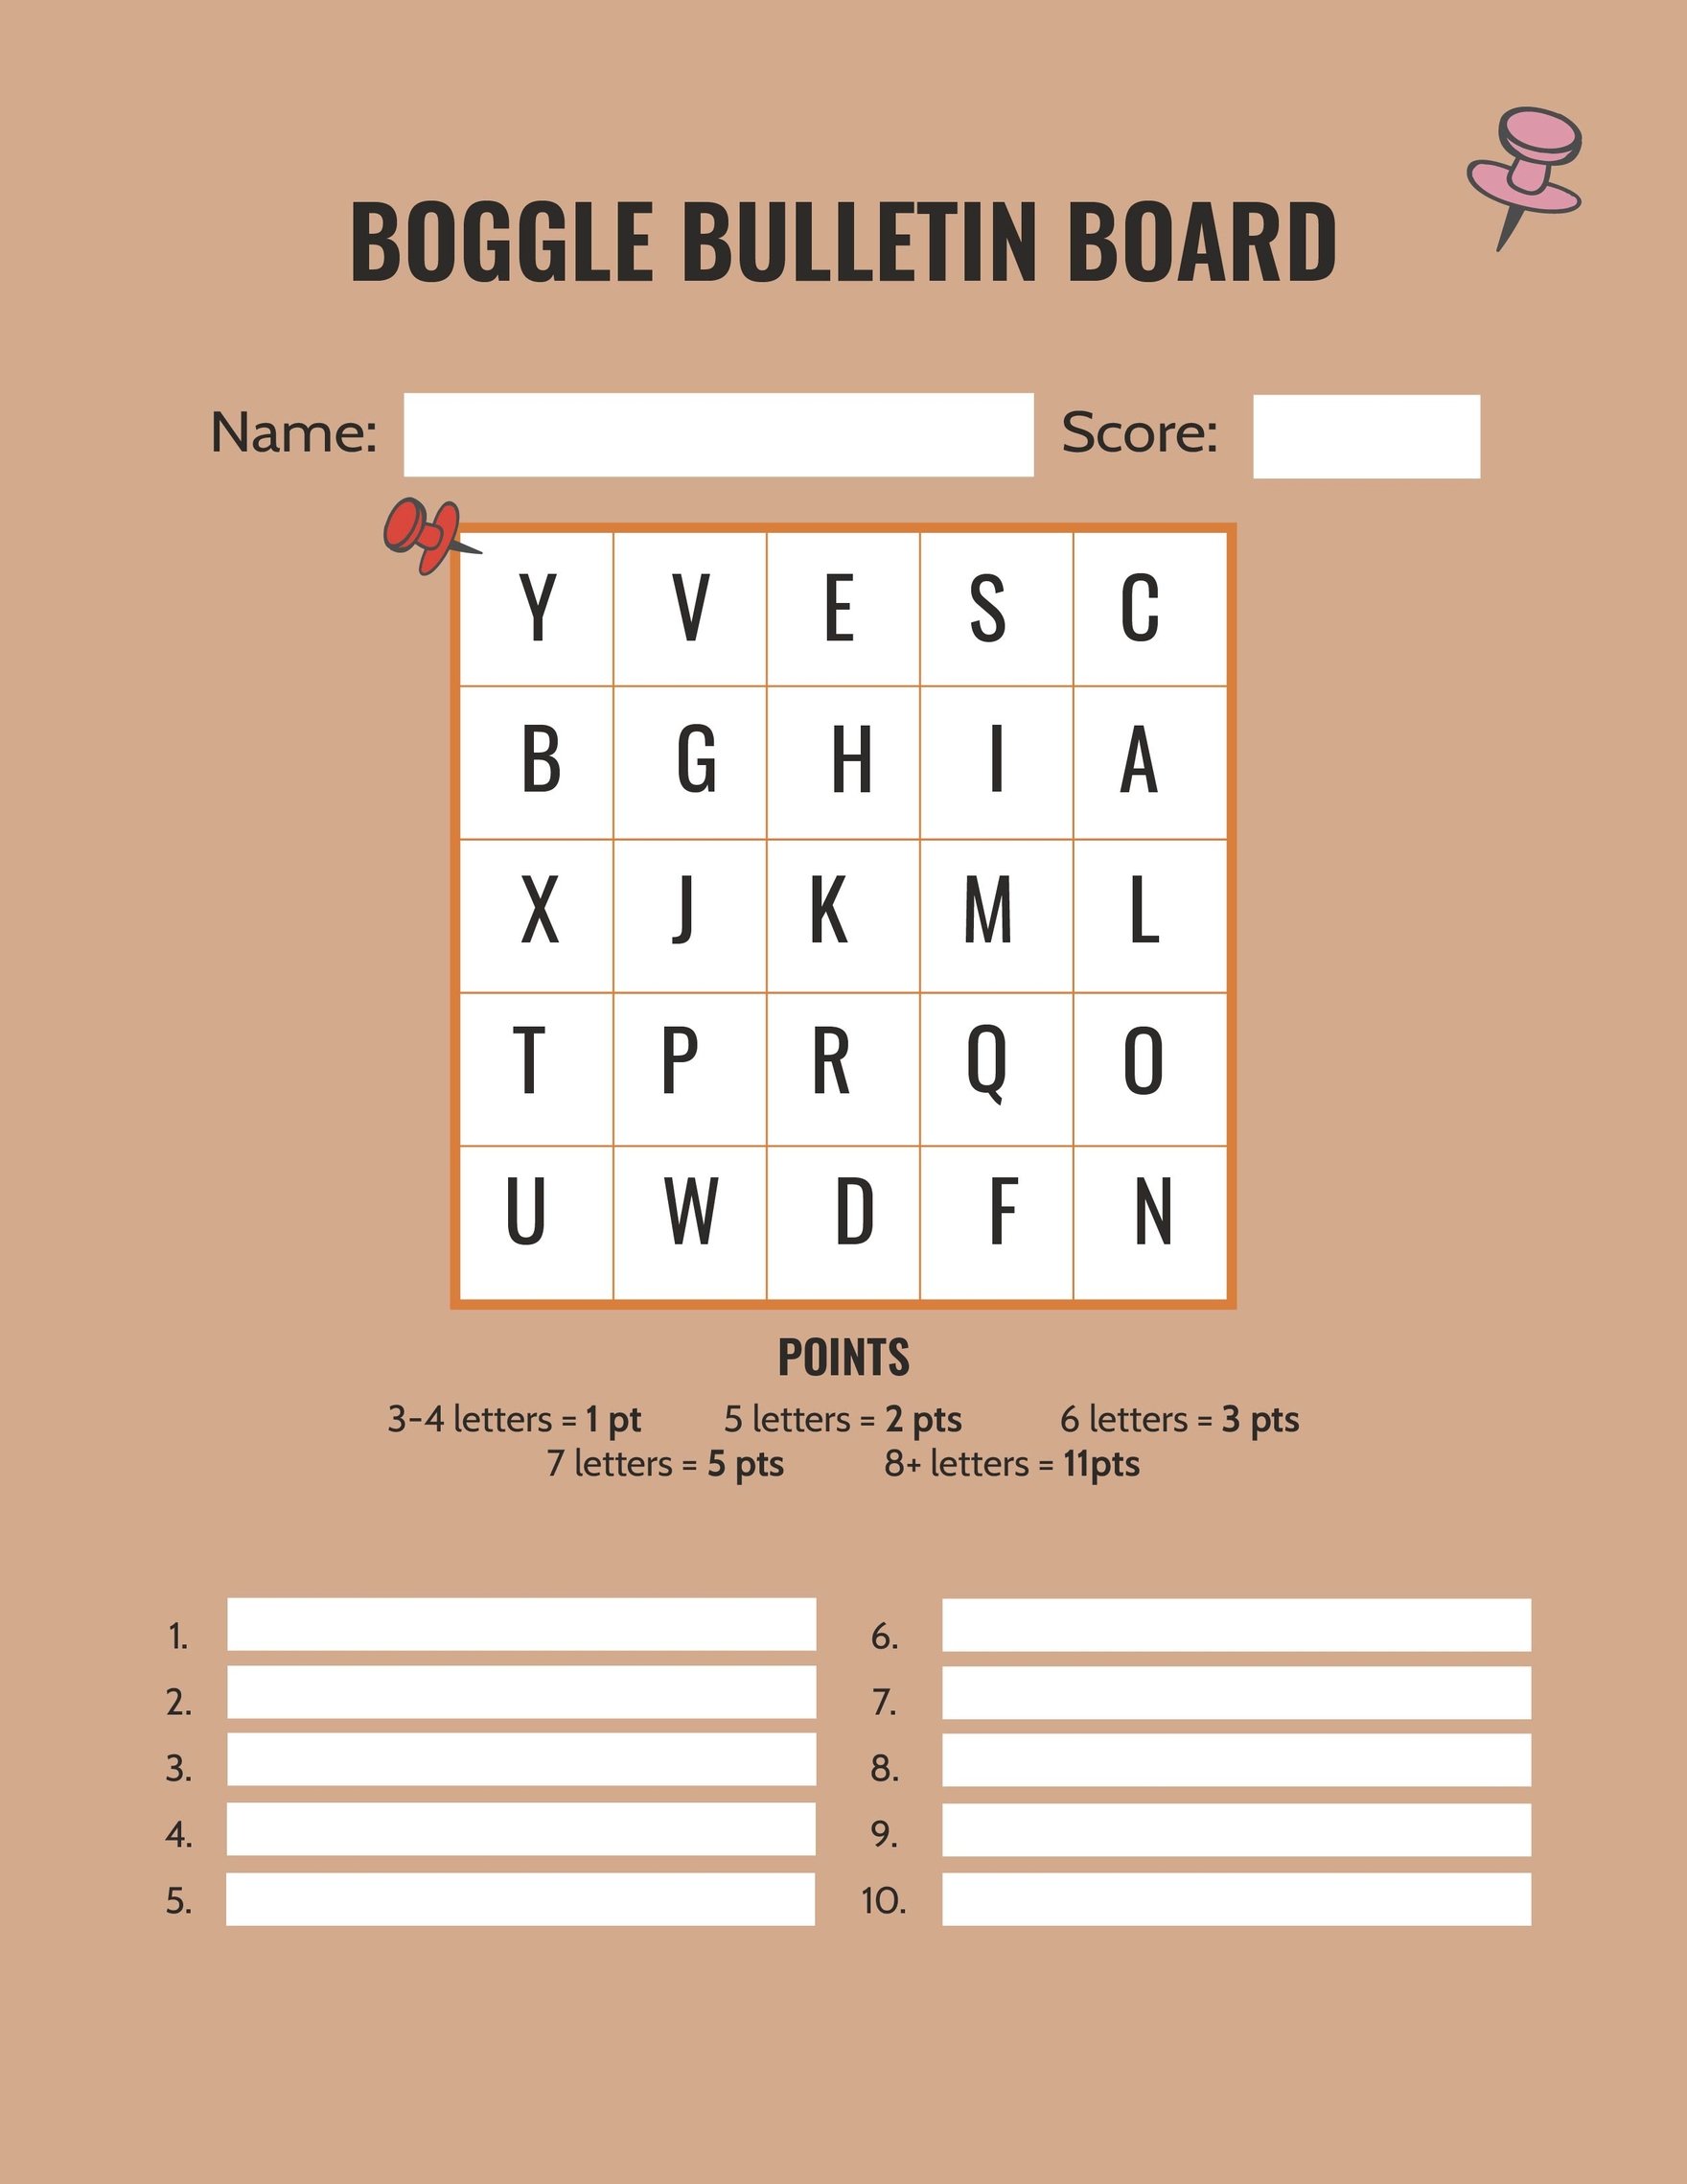 Boggle Bulletin Board Template in Word, Google Docs, PDF, Apple Pages